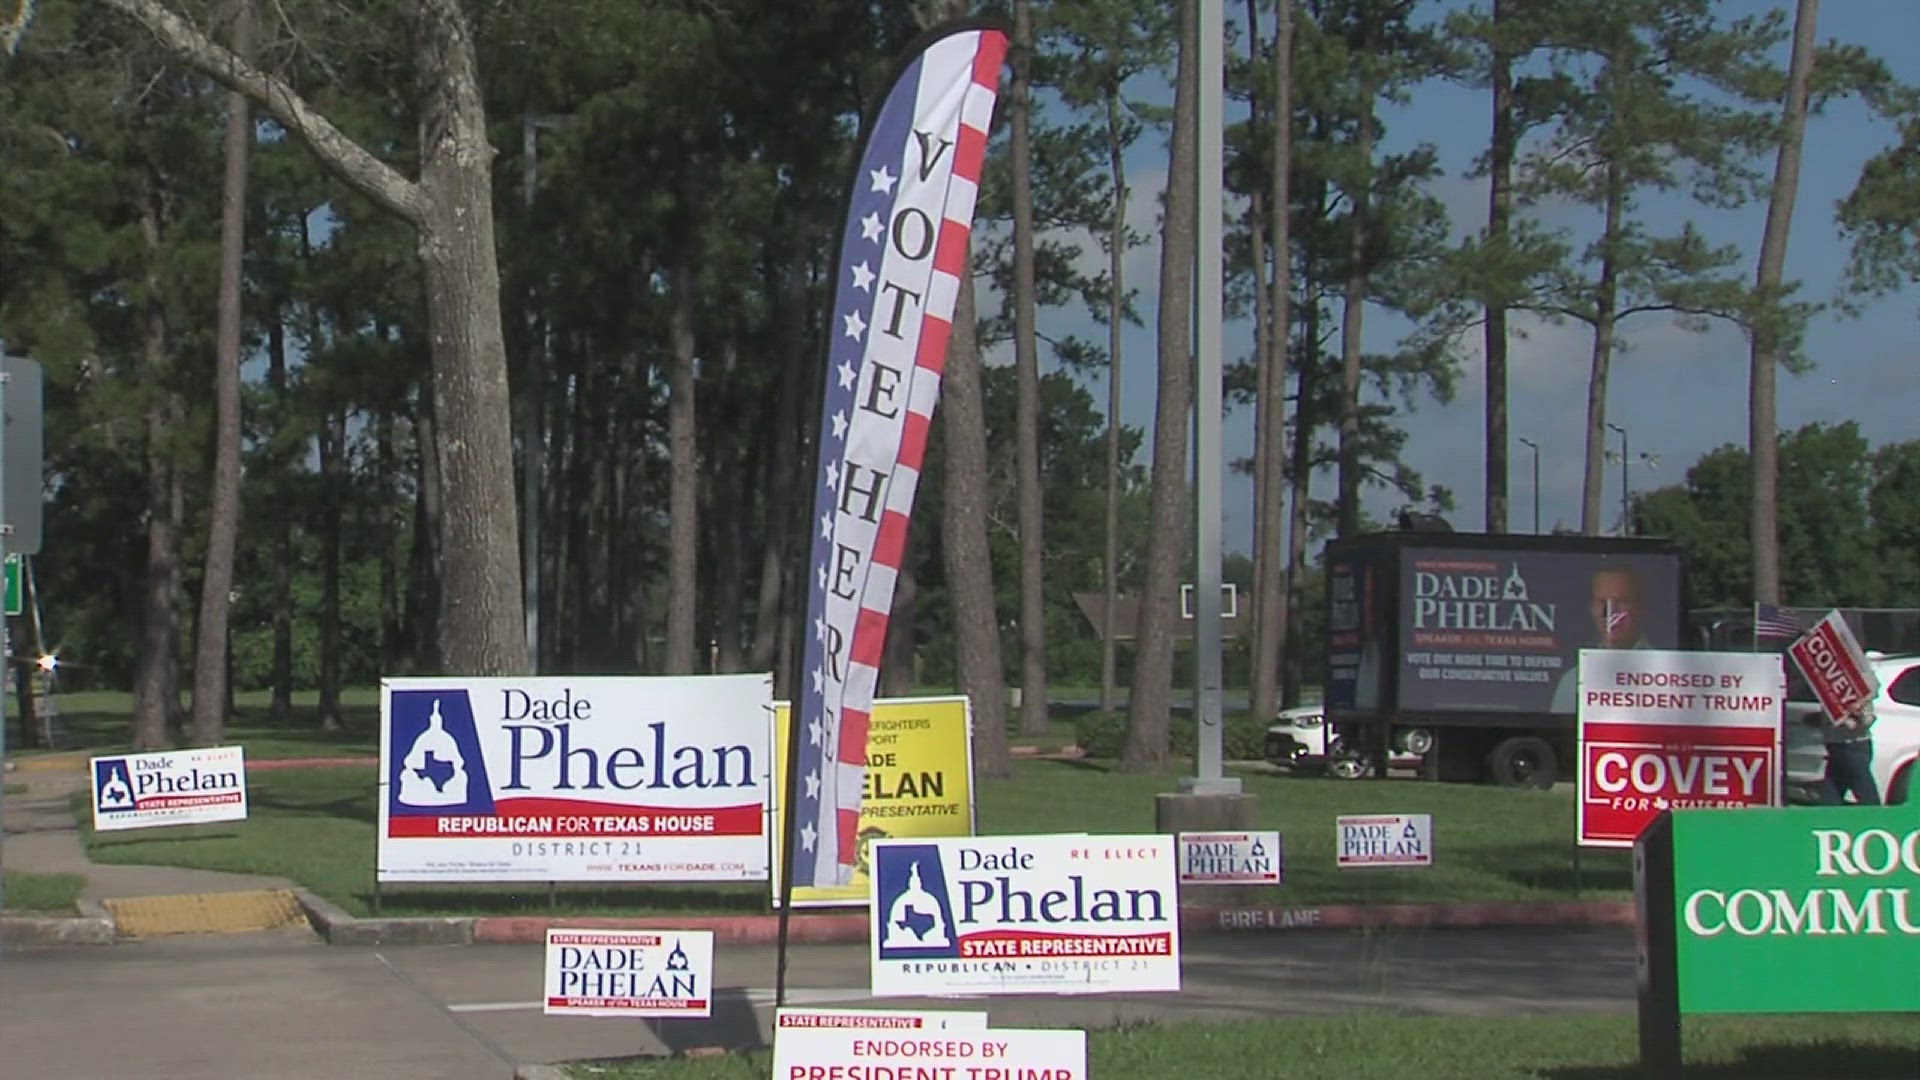 The showdown between Dade Phelan and David Covey brought in tens of thousands of voters from three major counties.